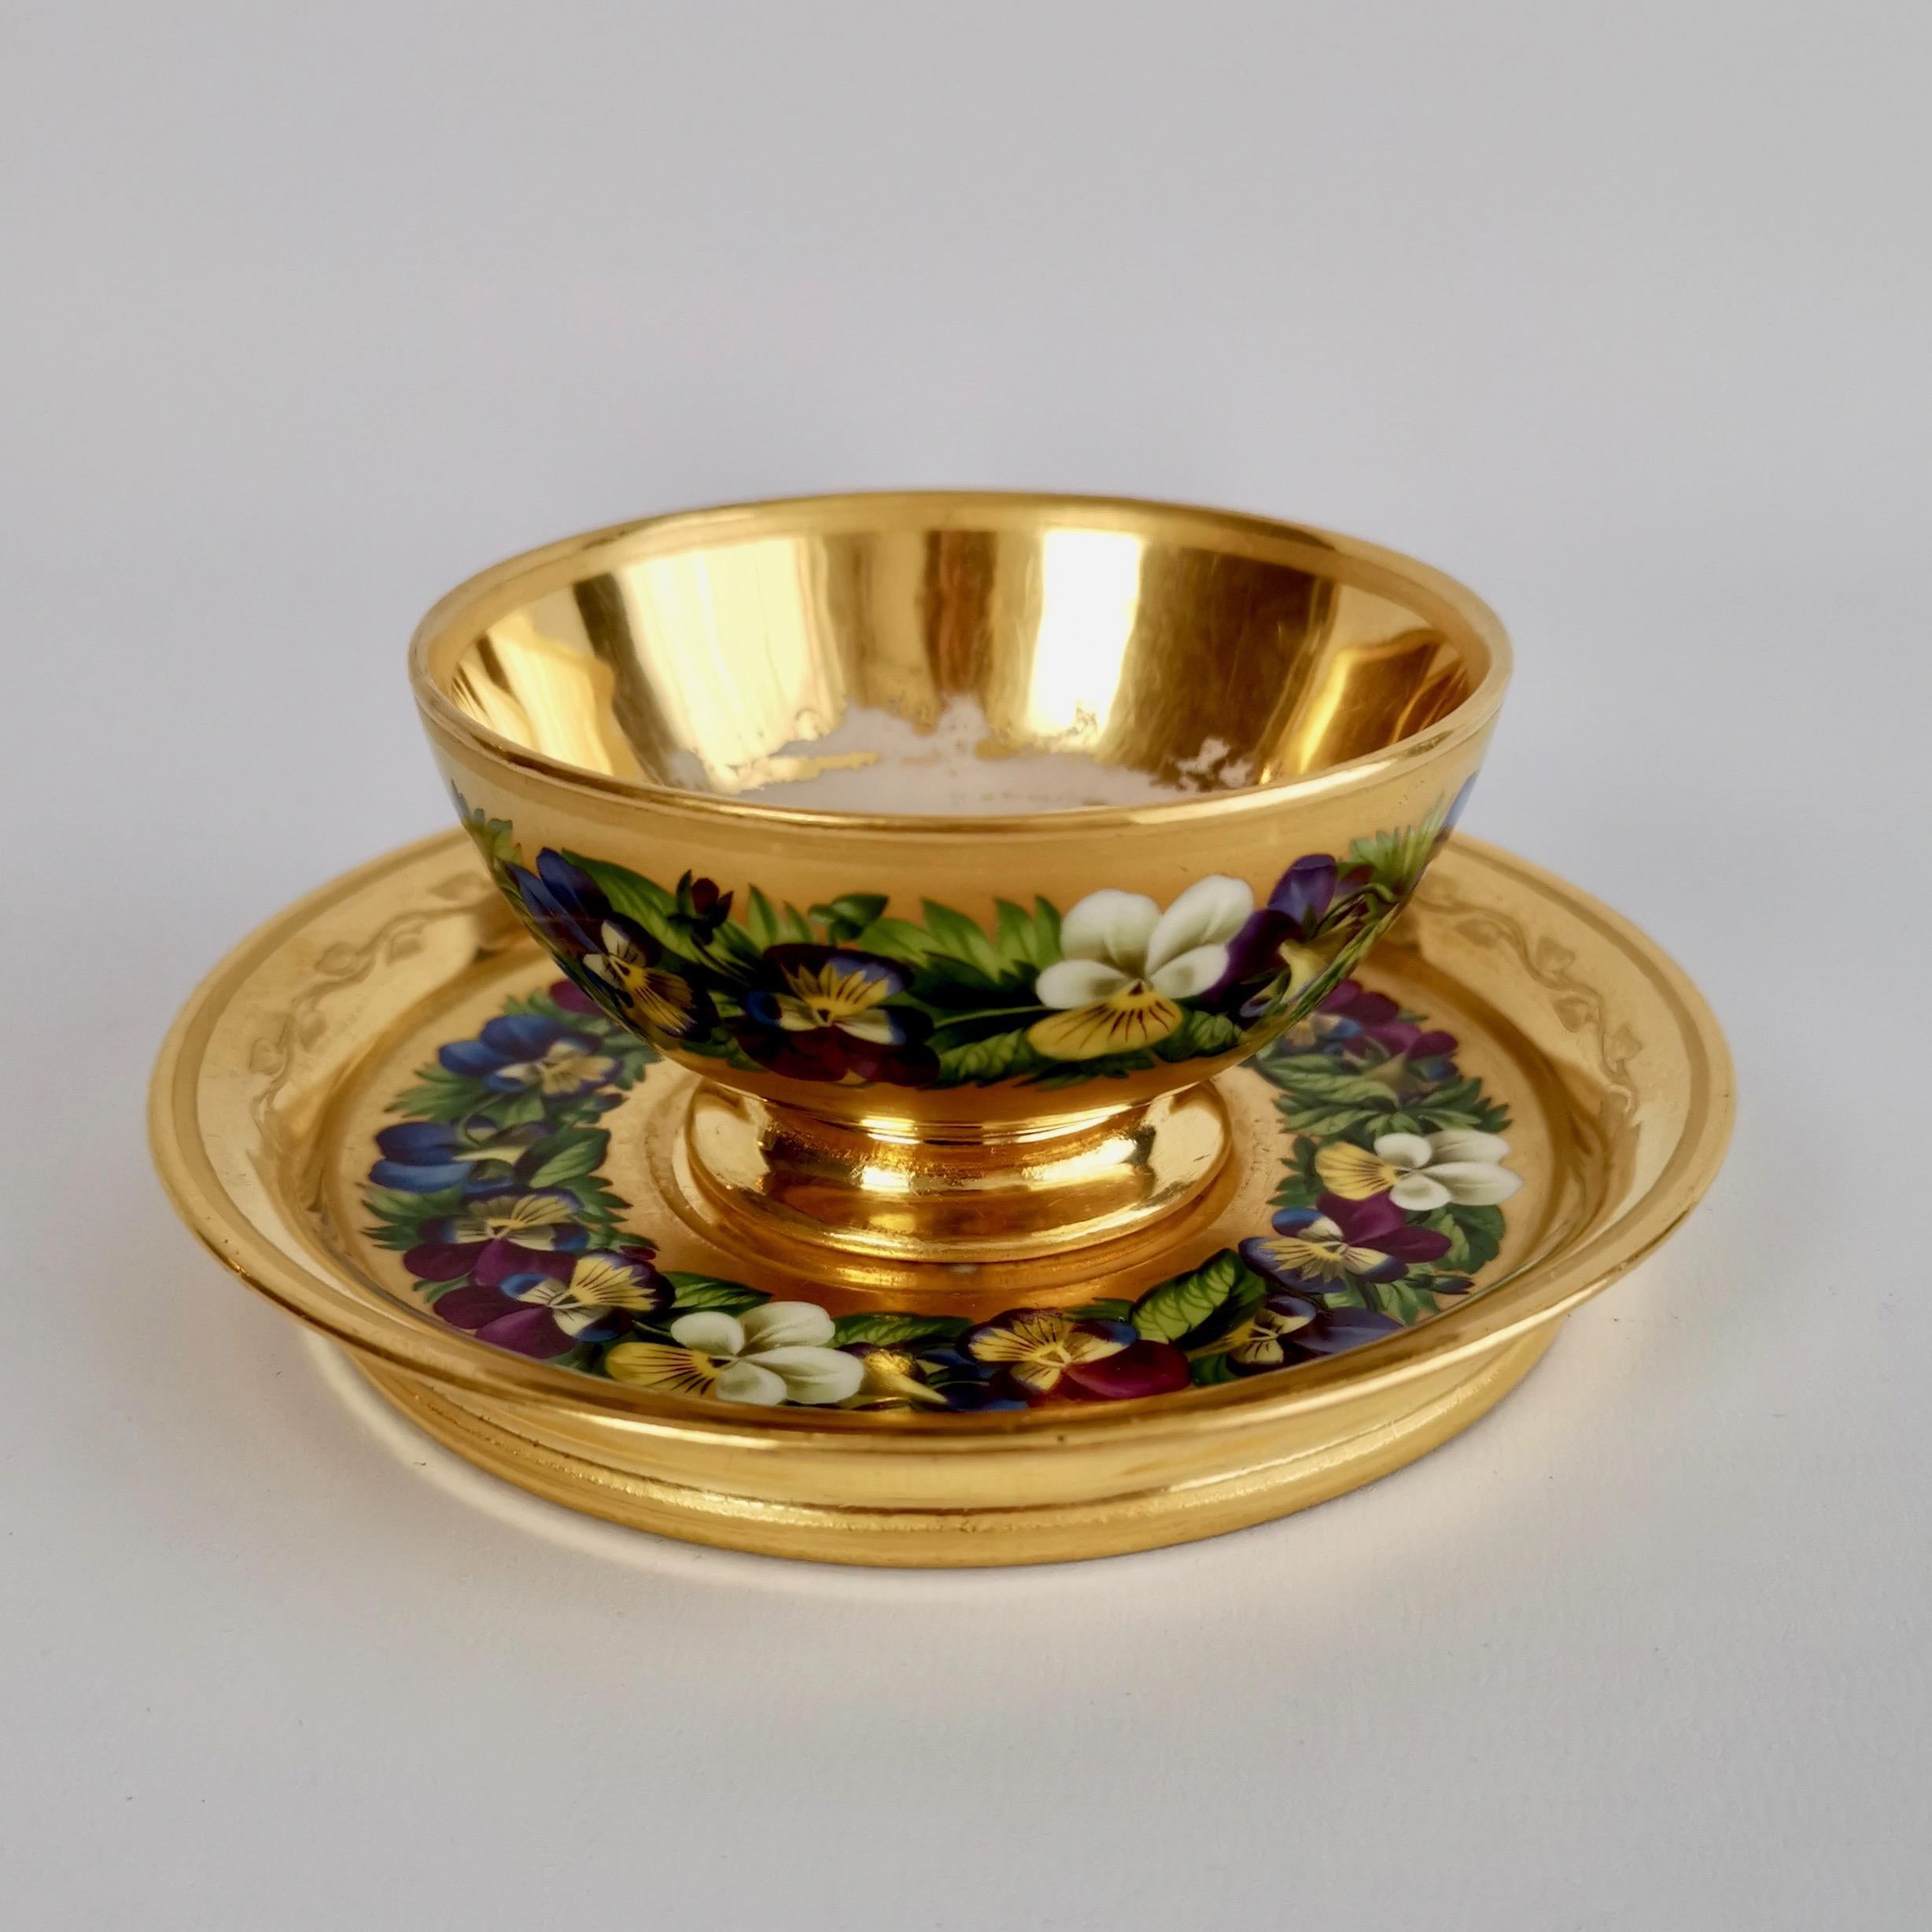 Empire Vienna Porcelain Teacup and Saucer, Gilt and Pansies by Anton Friedl, 1826